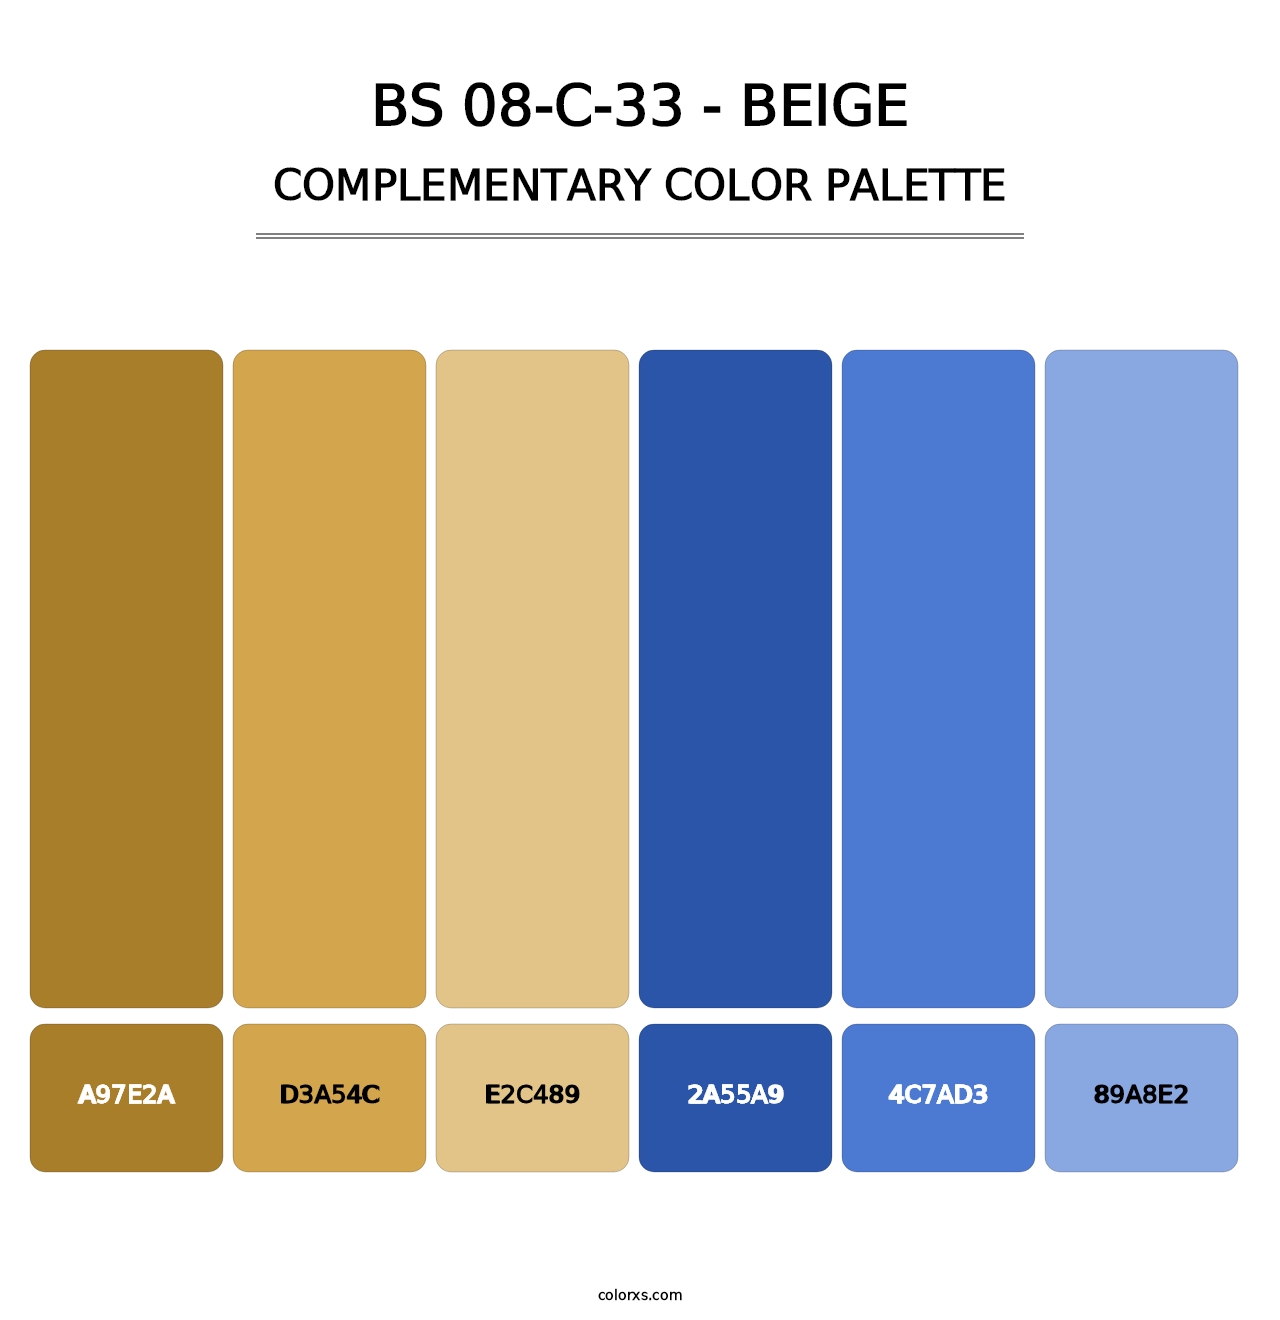 BS 08-C-33 - Beige - Complementary Color Palette